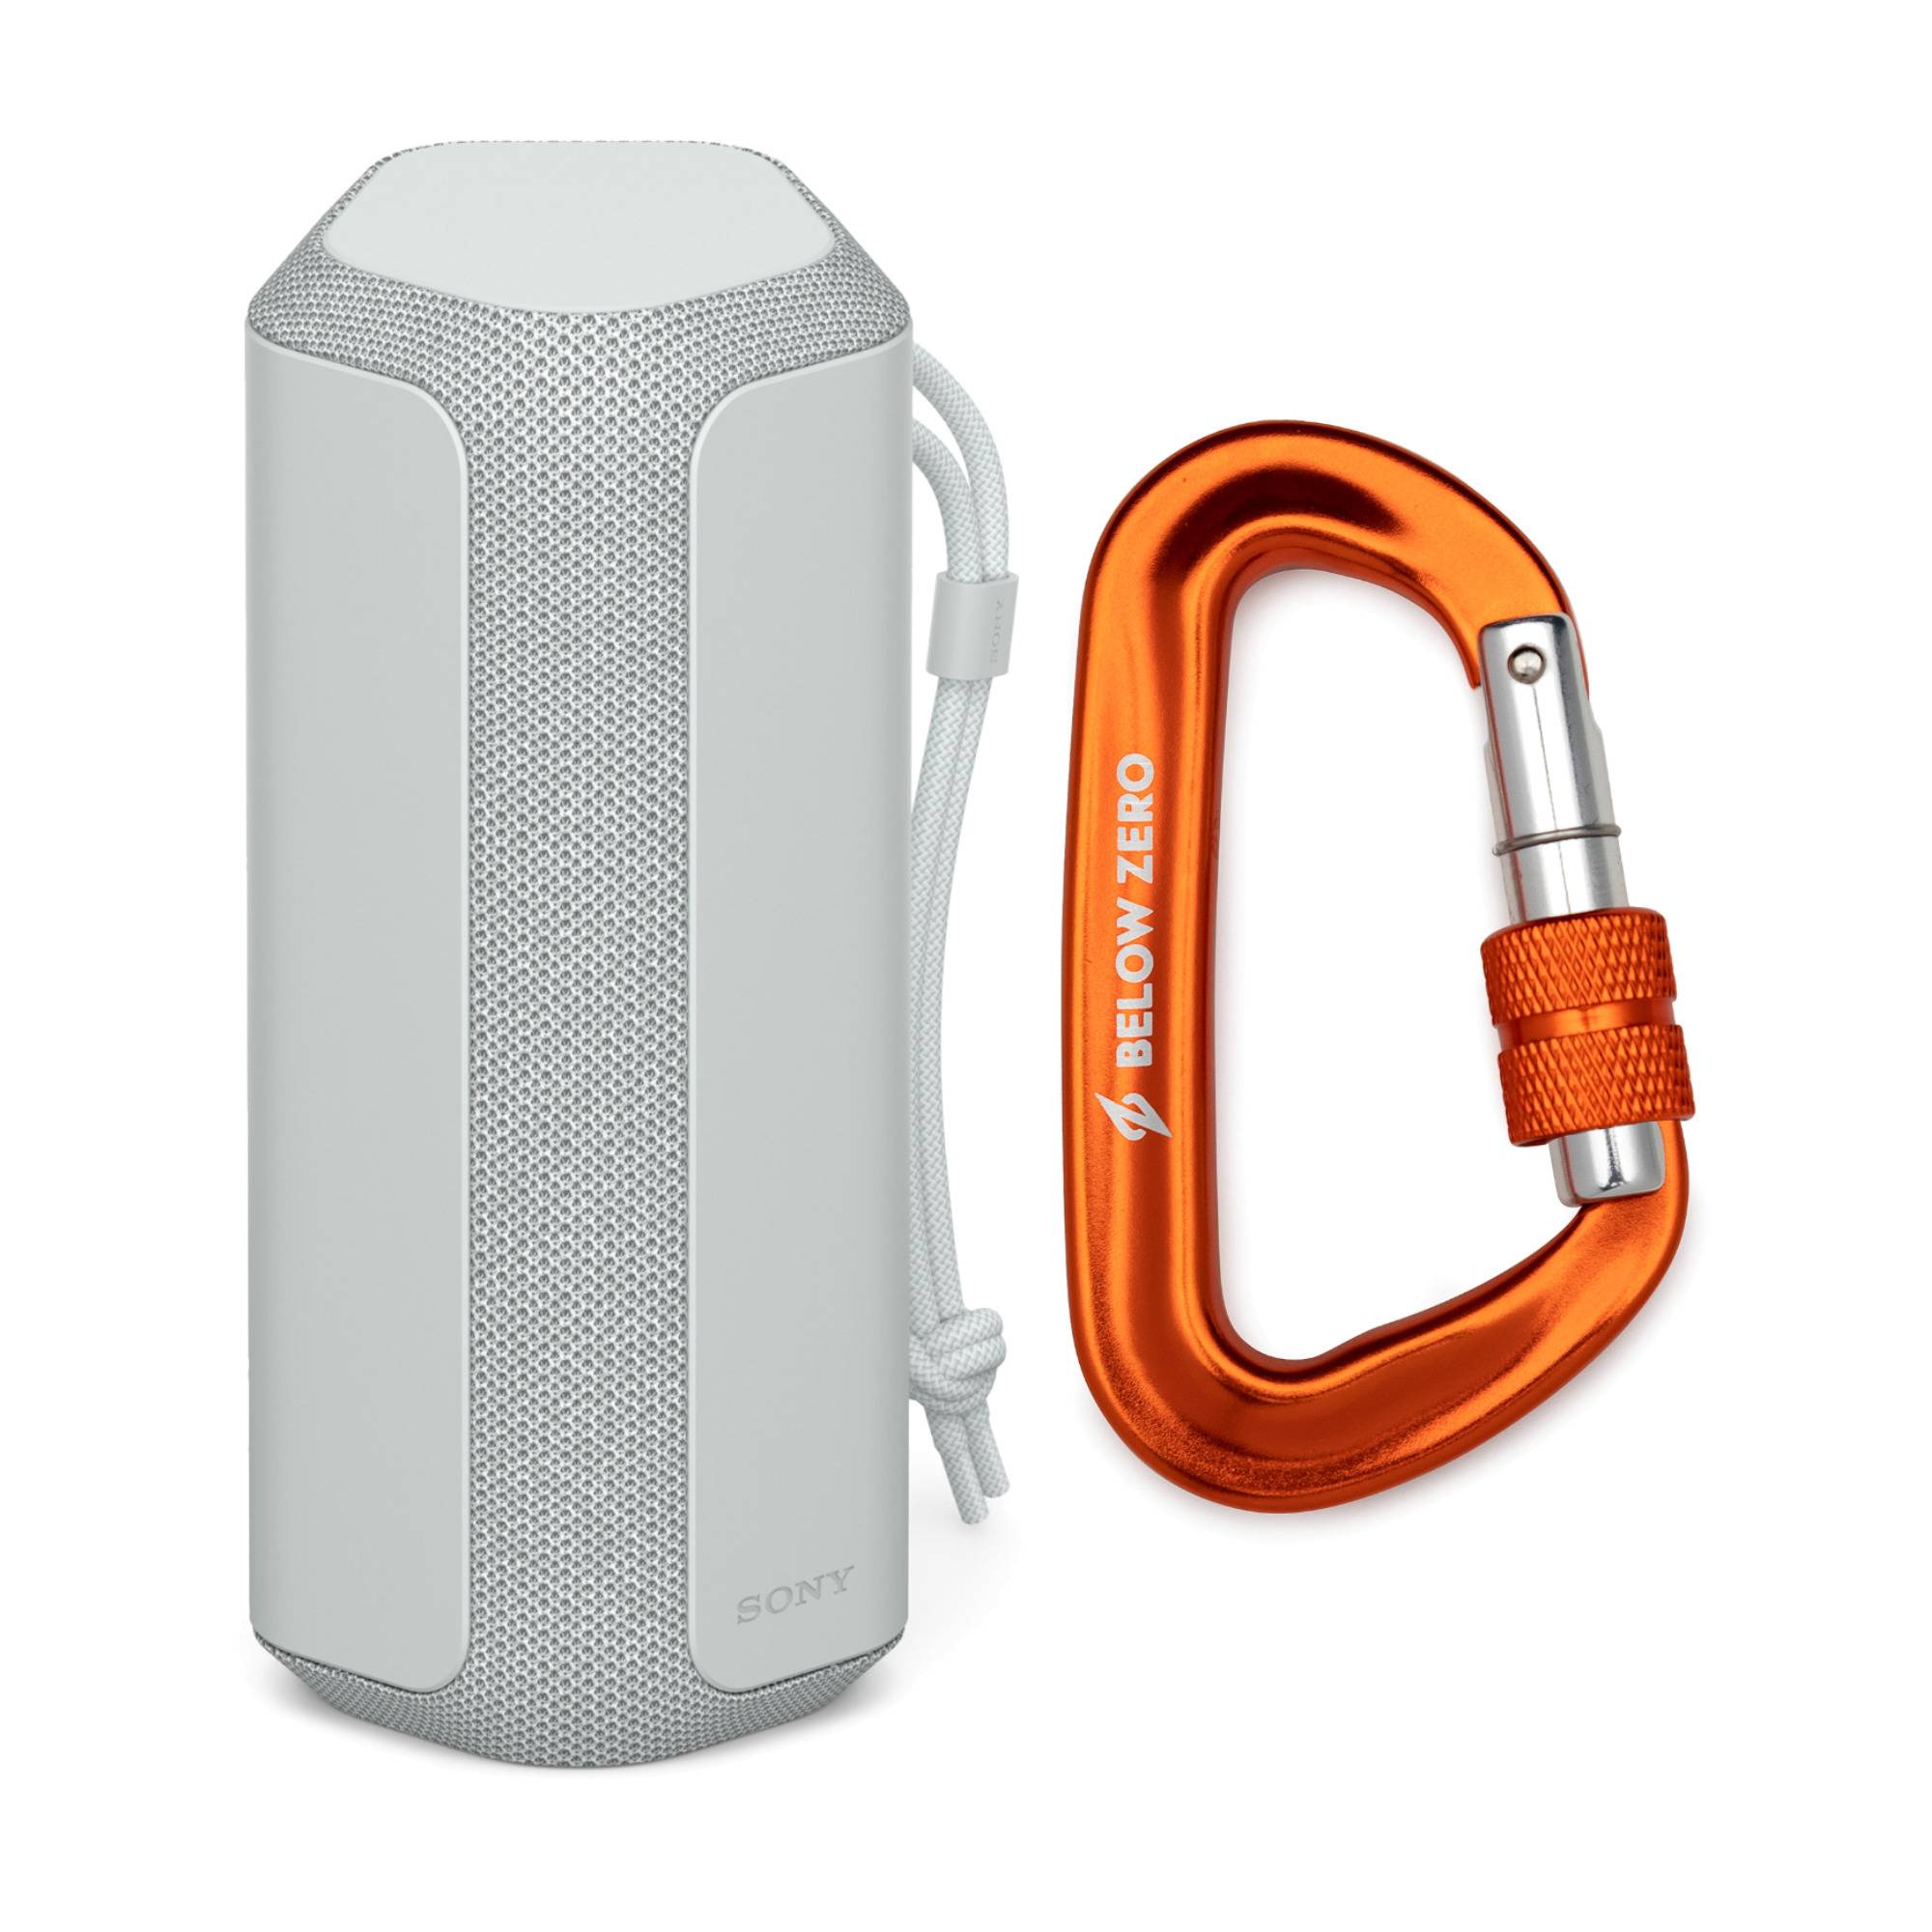 Sony SRS-XE200 X-Series Wireless Ultra Portable-Bluetooth-Speaker (Light Gray) with Carabiner